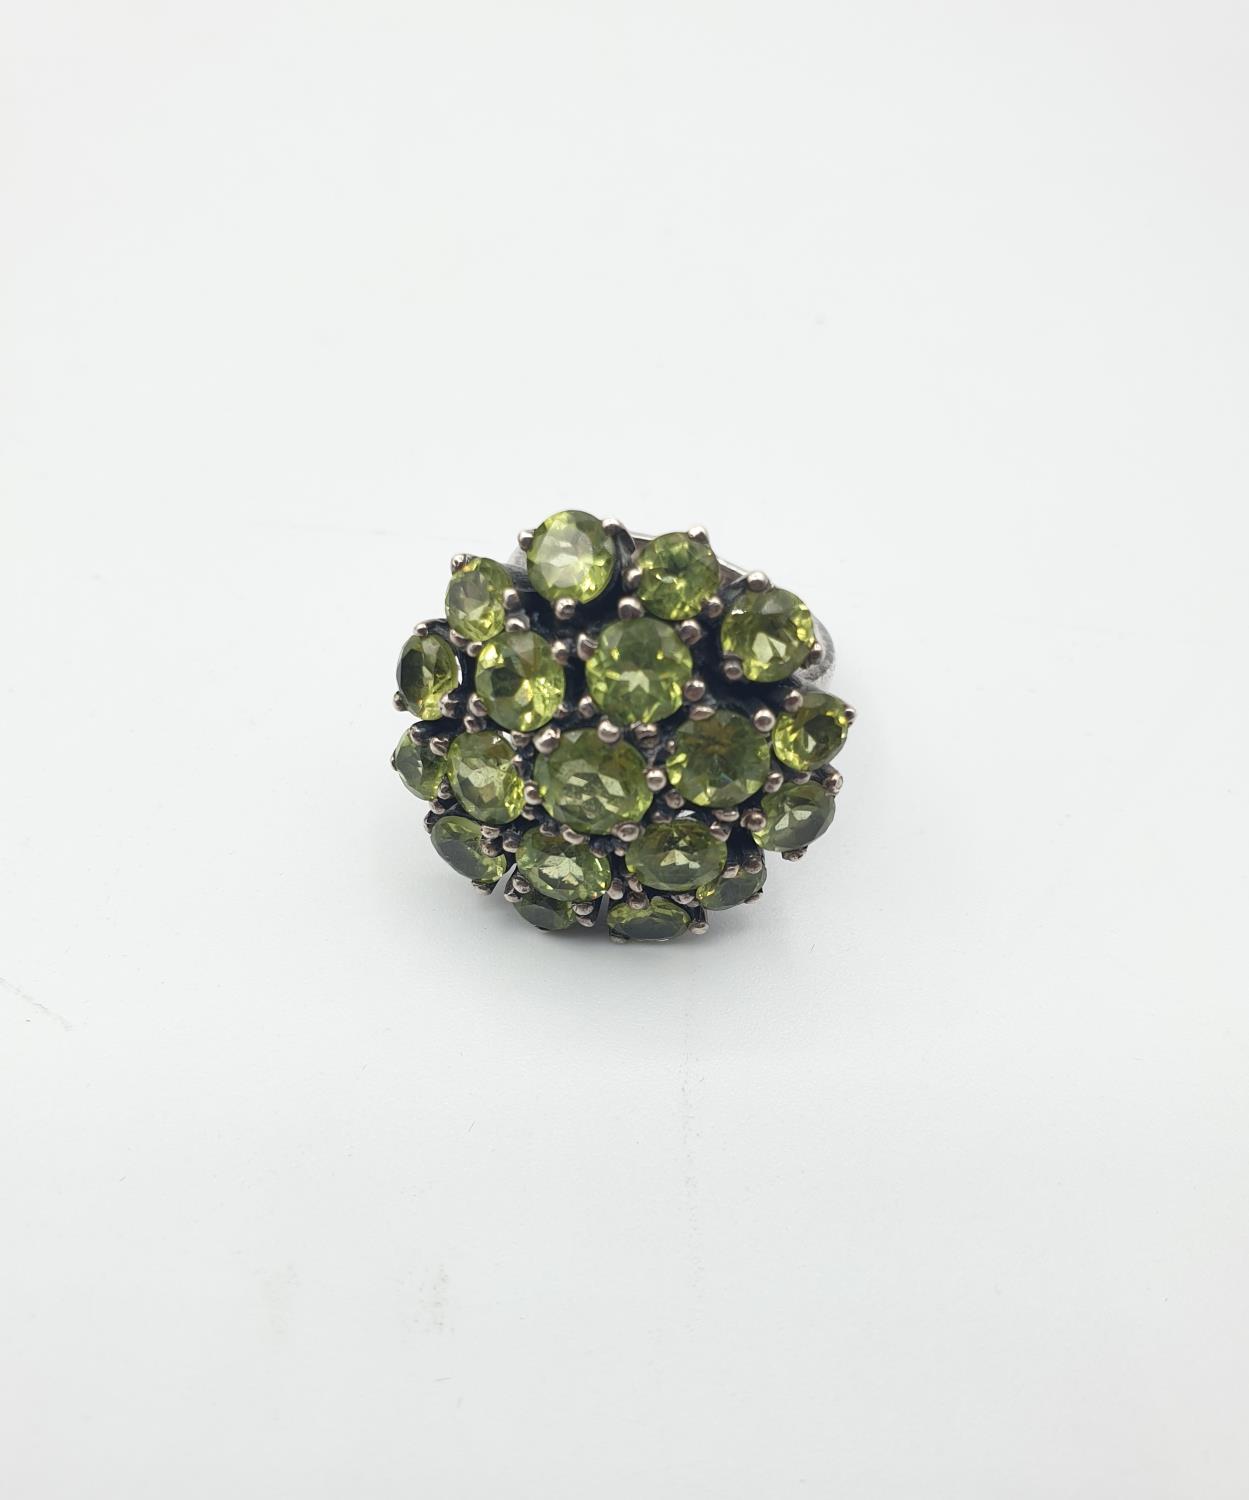 Vintage stone set silver and peridot ring having 19 stones set in flower formation. Size N - Image 3 of 4